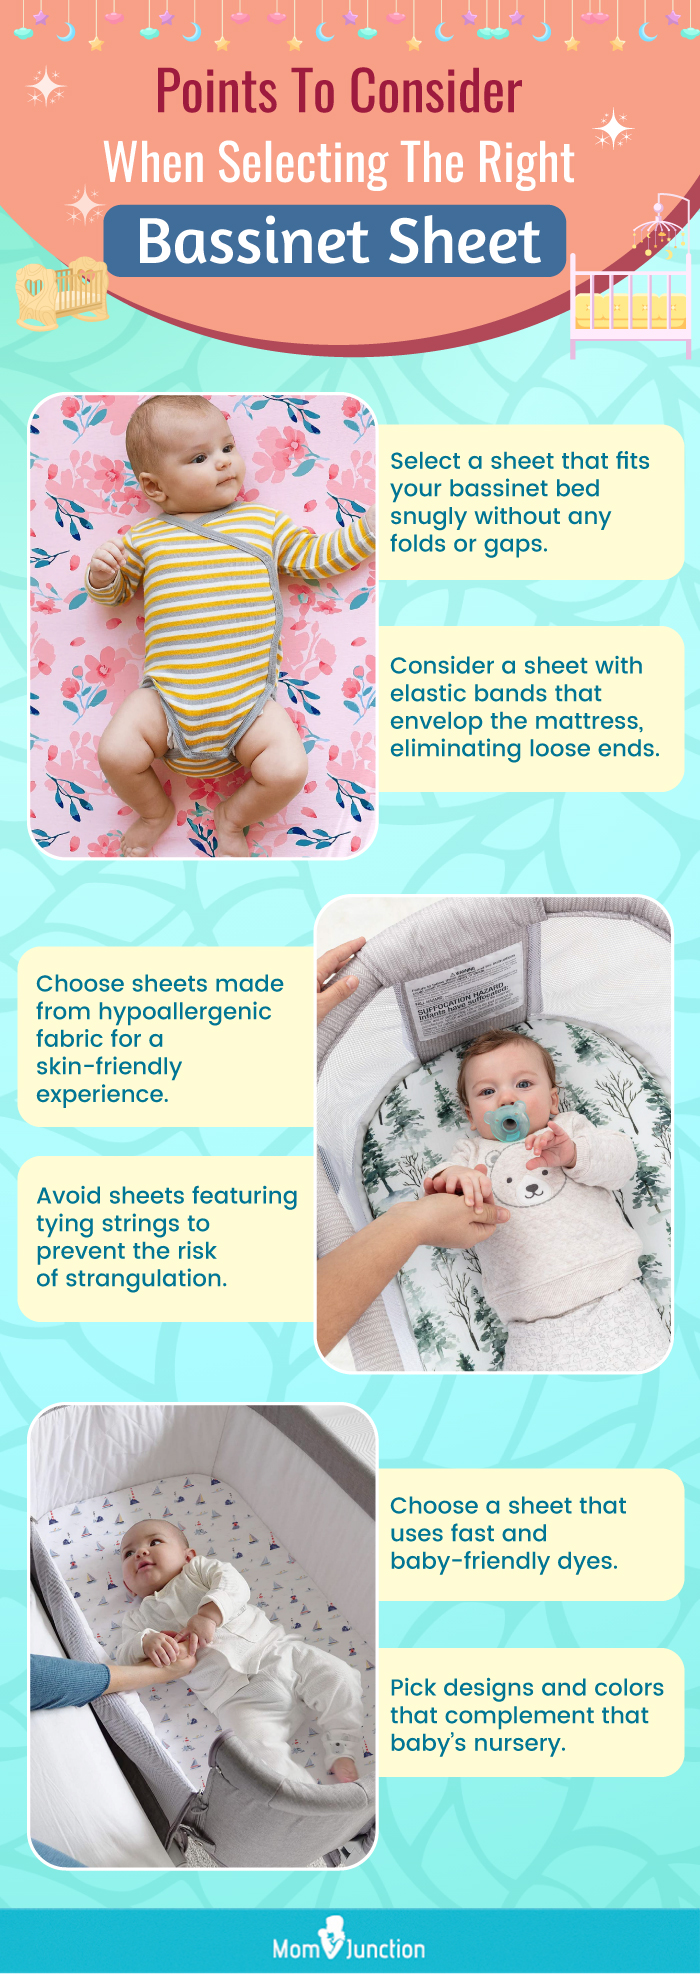 Points To Consider When Selecting The Right Bassinet Sheet (infographic)